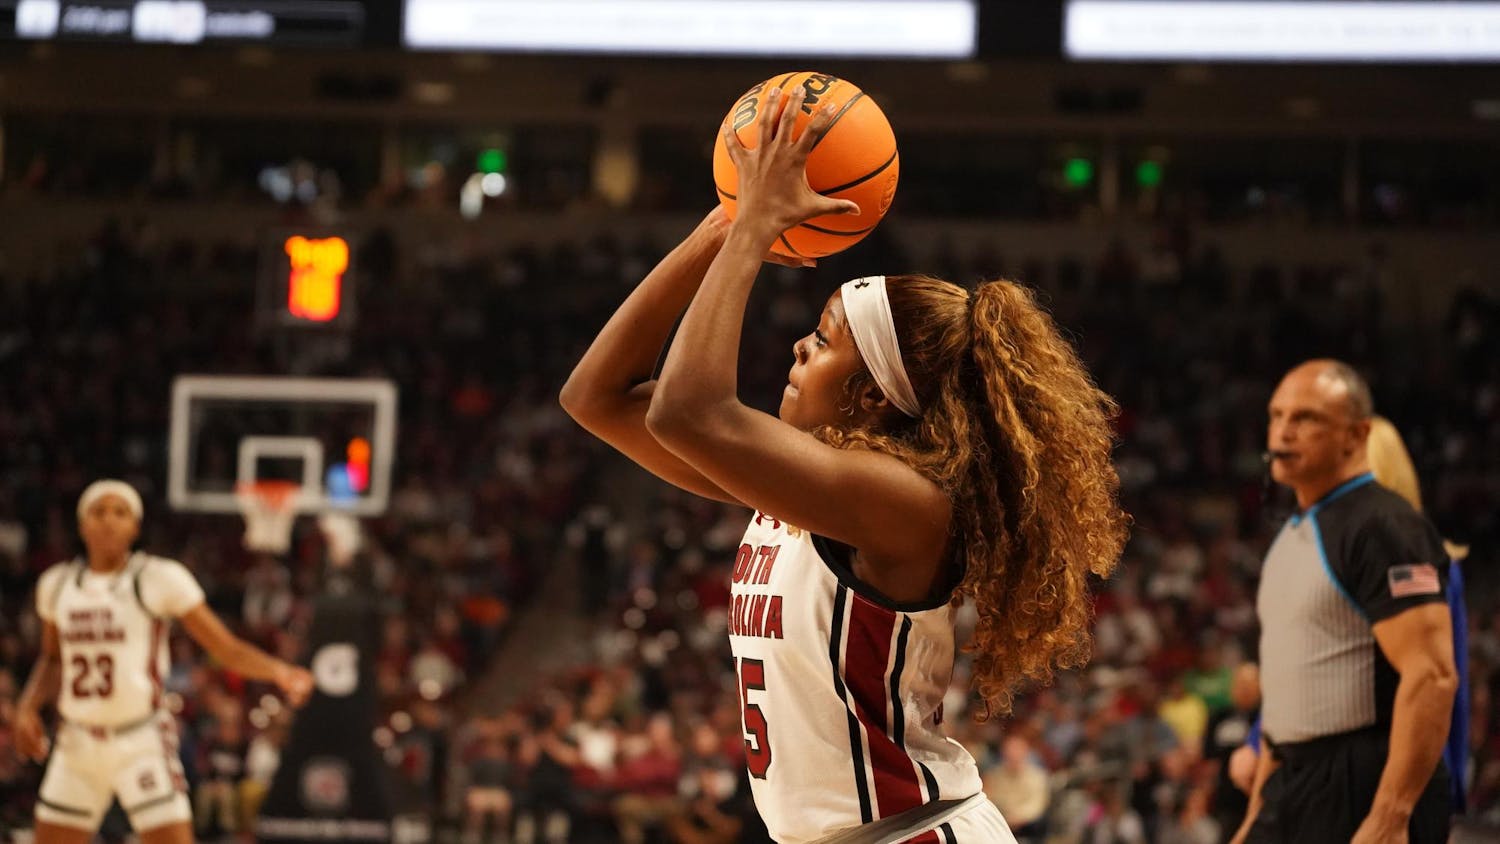 Sophomore guard Raven Johnson attempts a 3-point shot from the corner during South Carolina's game against Georgia on Feb. 18, 2024, at Colonial Life Arena. Johnson scored 9 points in the Gamecocks' 70-56 victory over the Bulldogs.